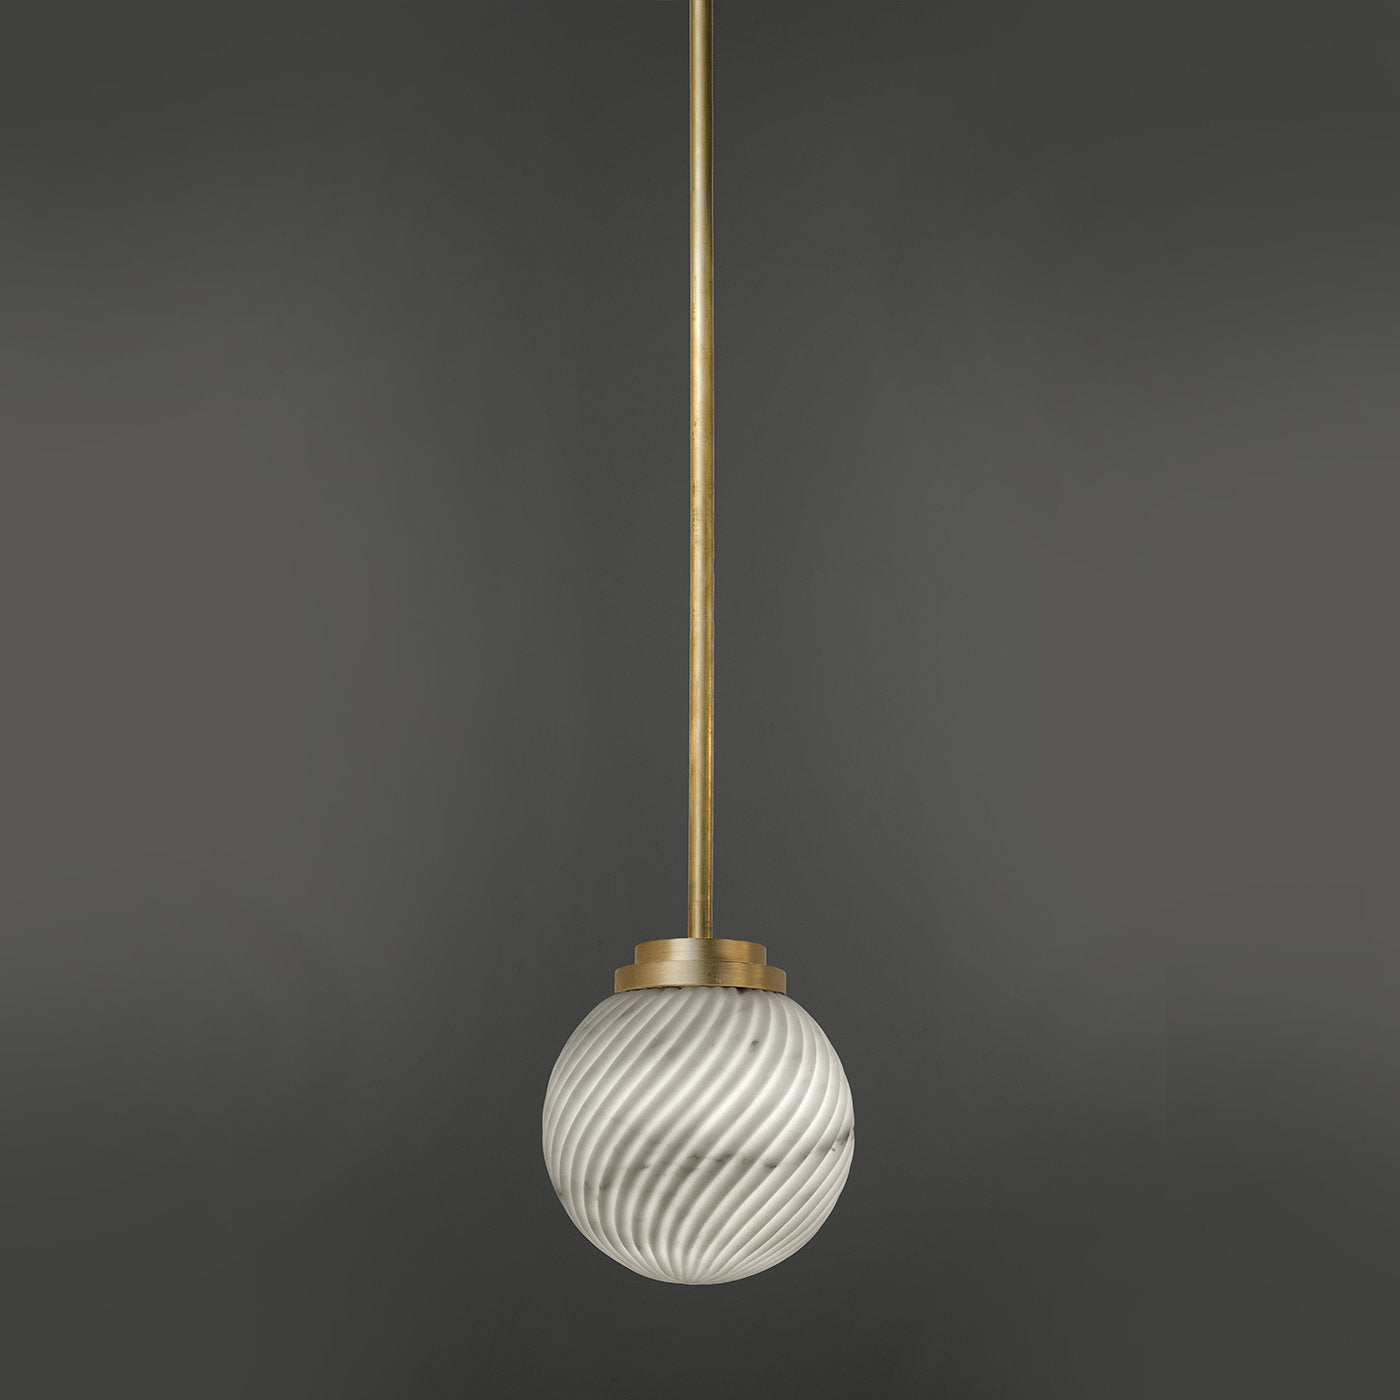 Victoria Pendant Lamp by Bethan Gray - Alternative view 1